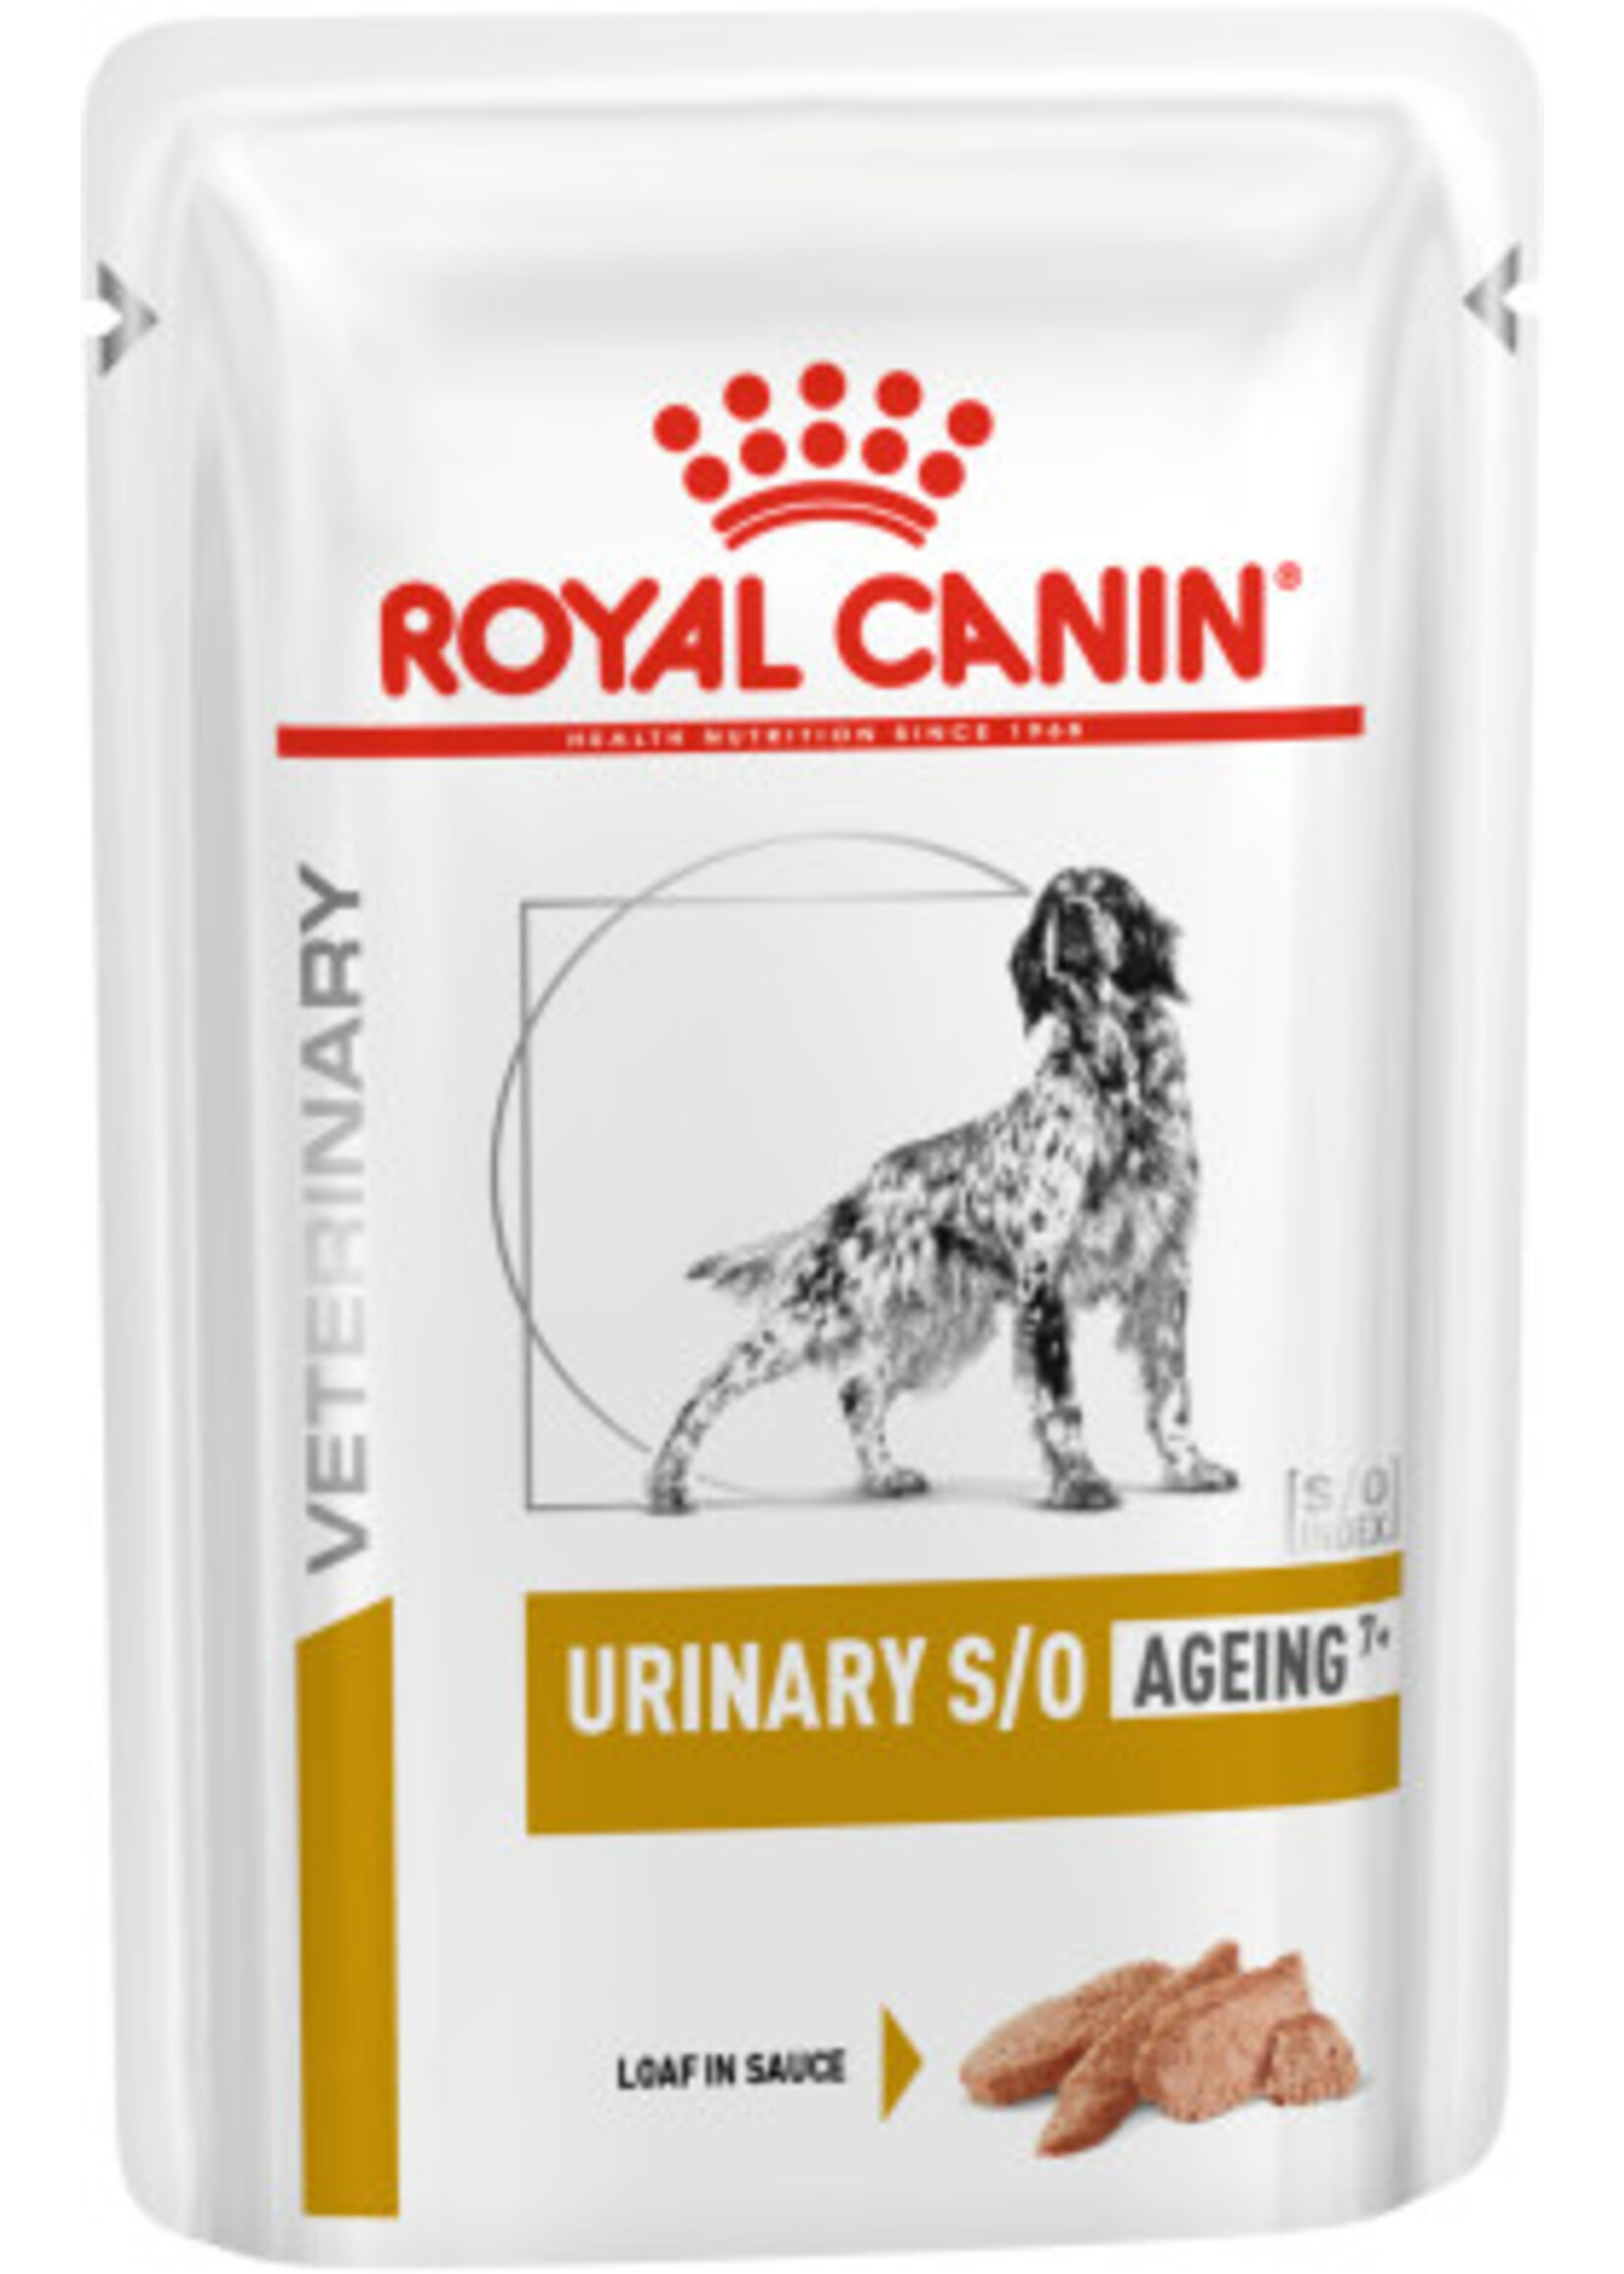 Royal Canin Royal Canin Wet Urinary S/o Ageing Hond 12x85g